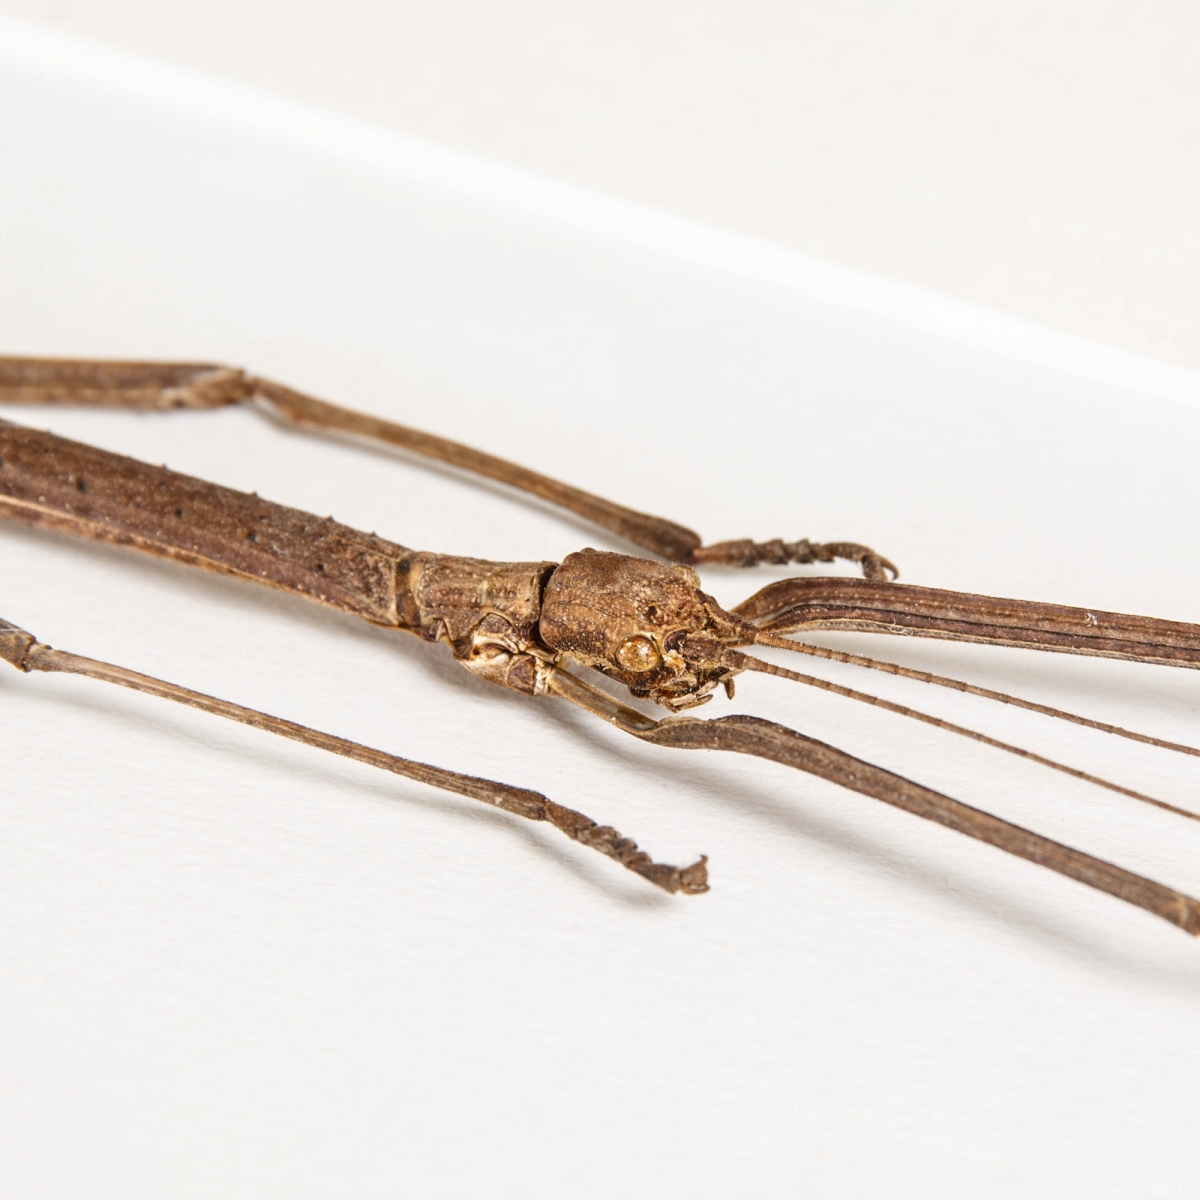 Small Red Winged Stick Insect in Box Frame (Phaenopharos struthioneus)